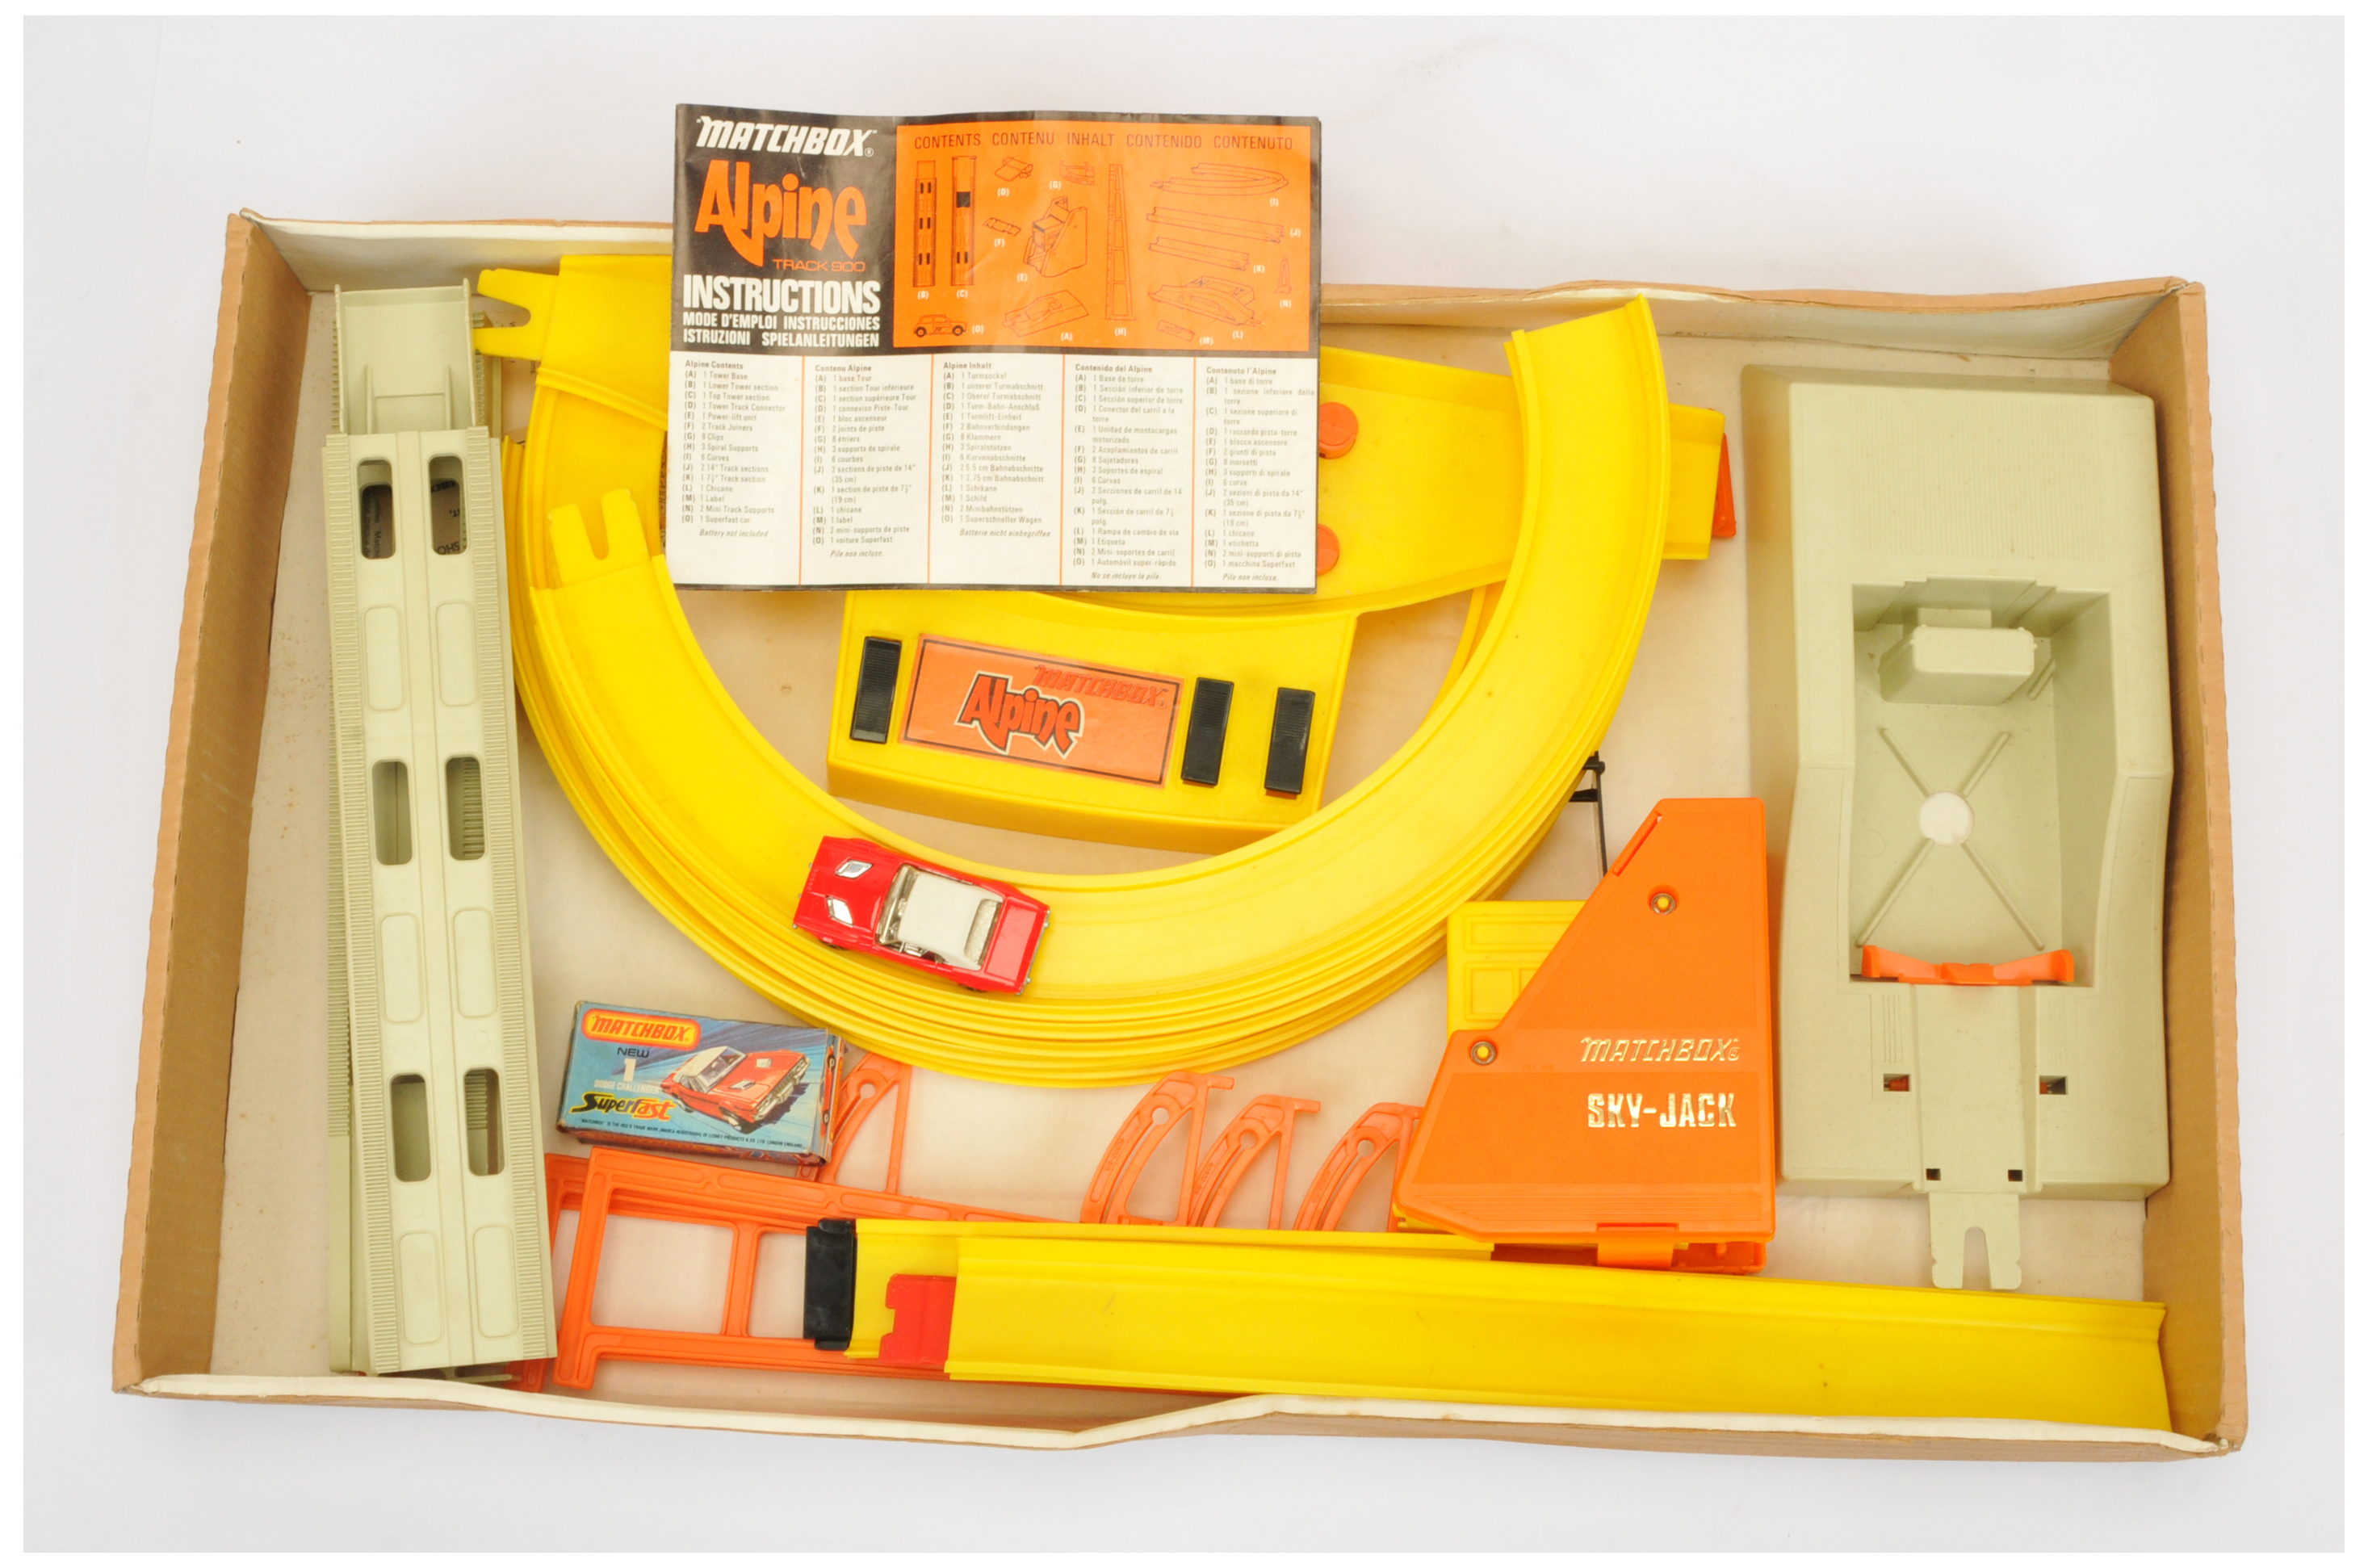 Matchbox Superfast Alpine Track Set 900 - appears to be complete with most components, including ... - Image 2 of 3